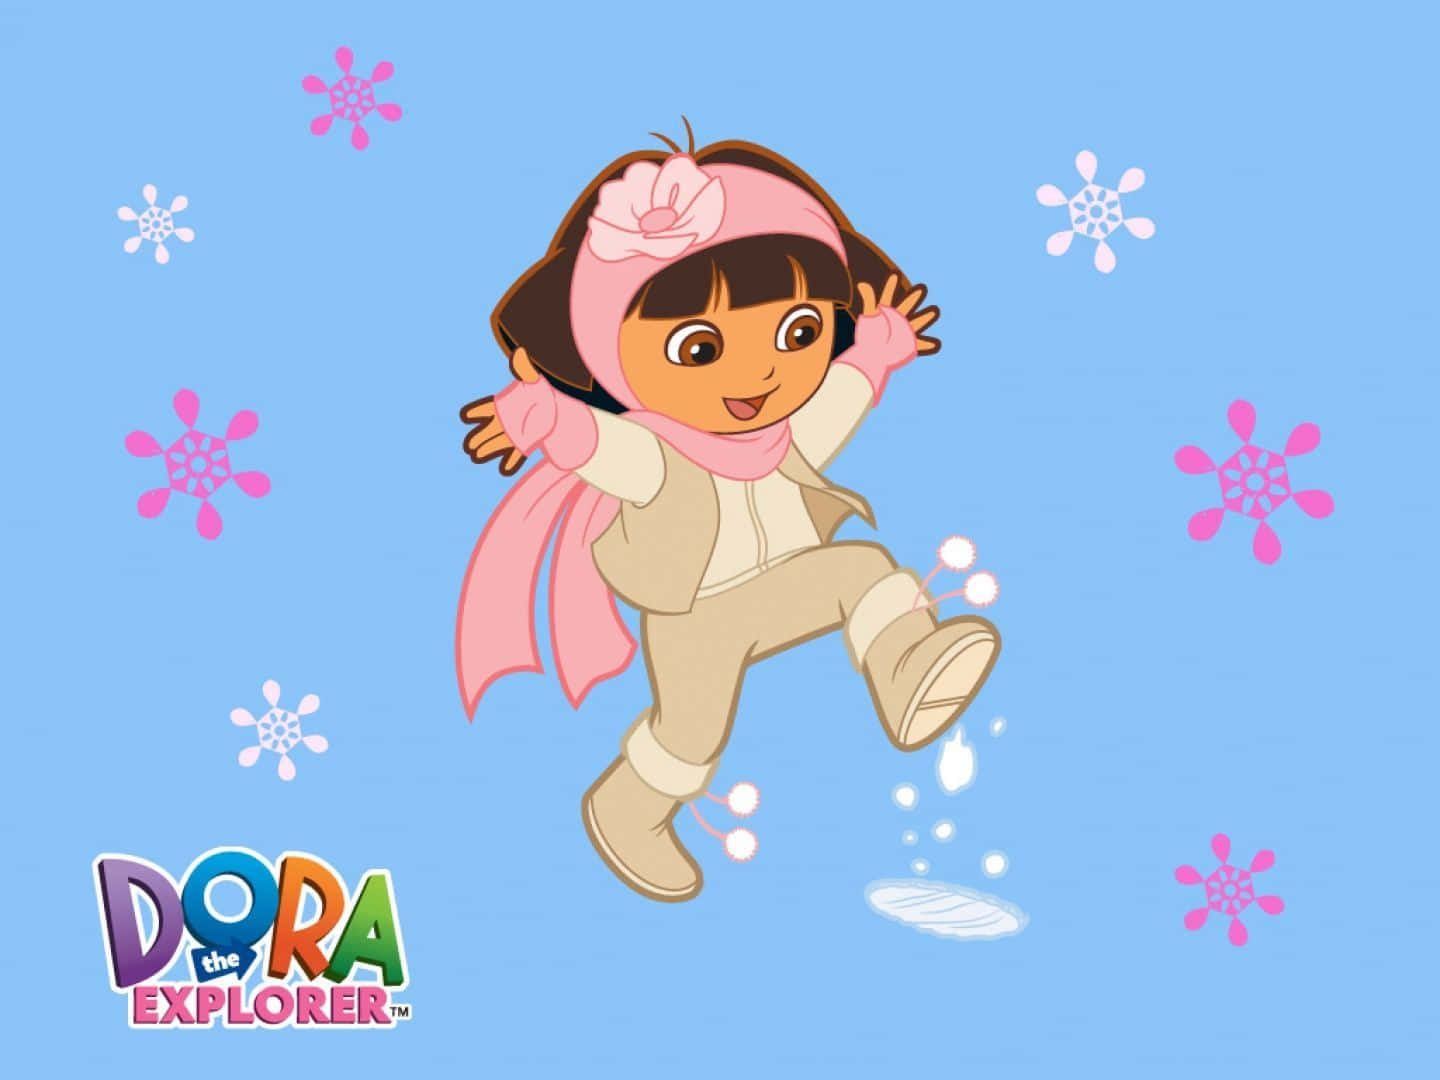 Join Dora and her adventures in the magical world!